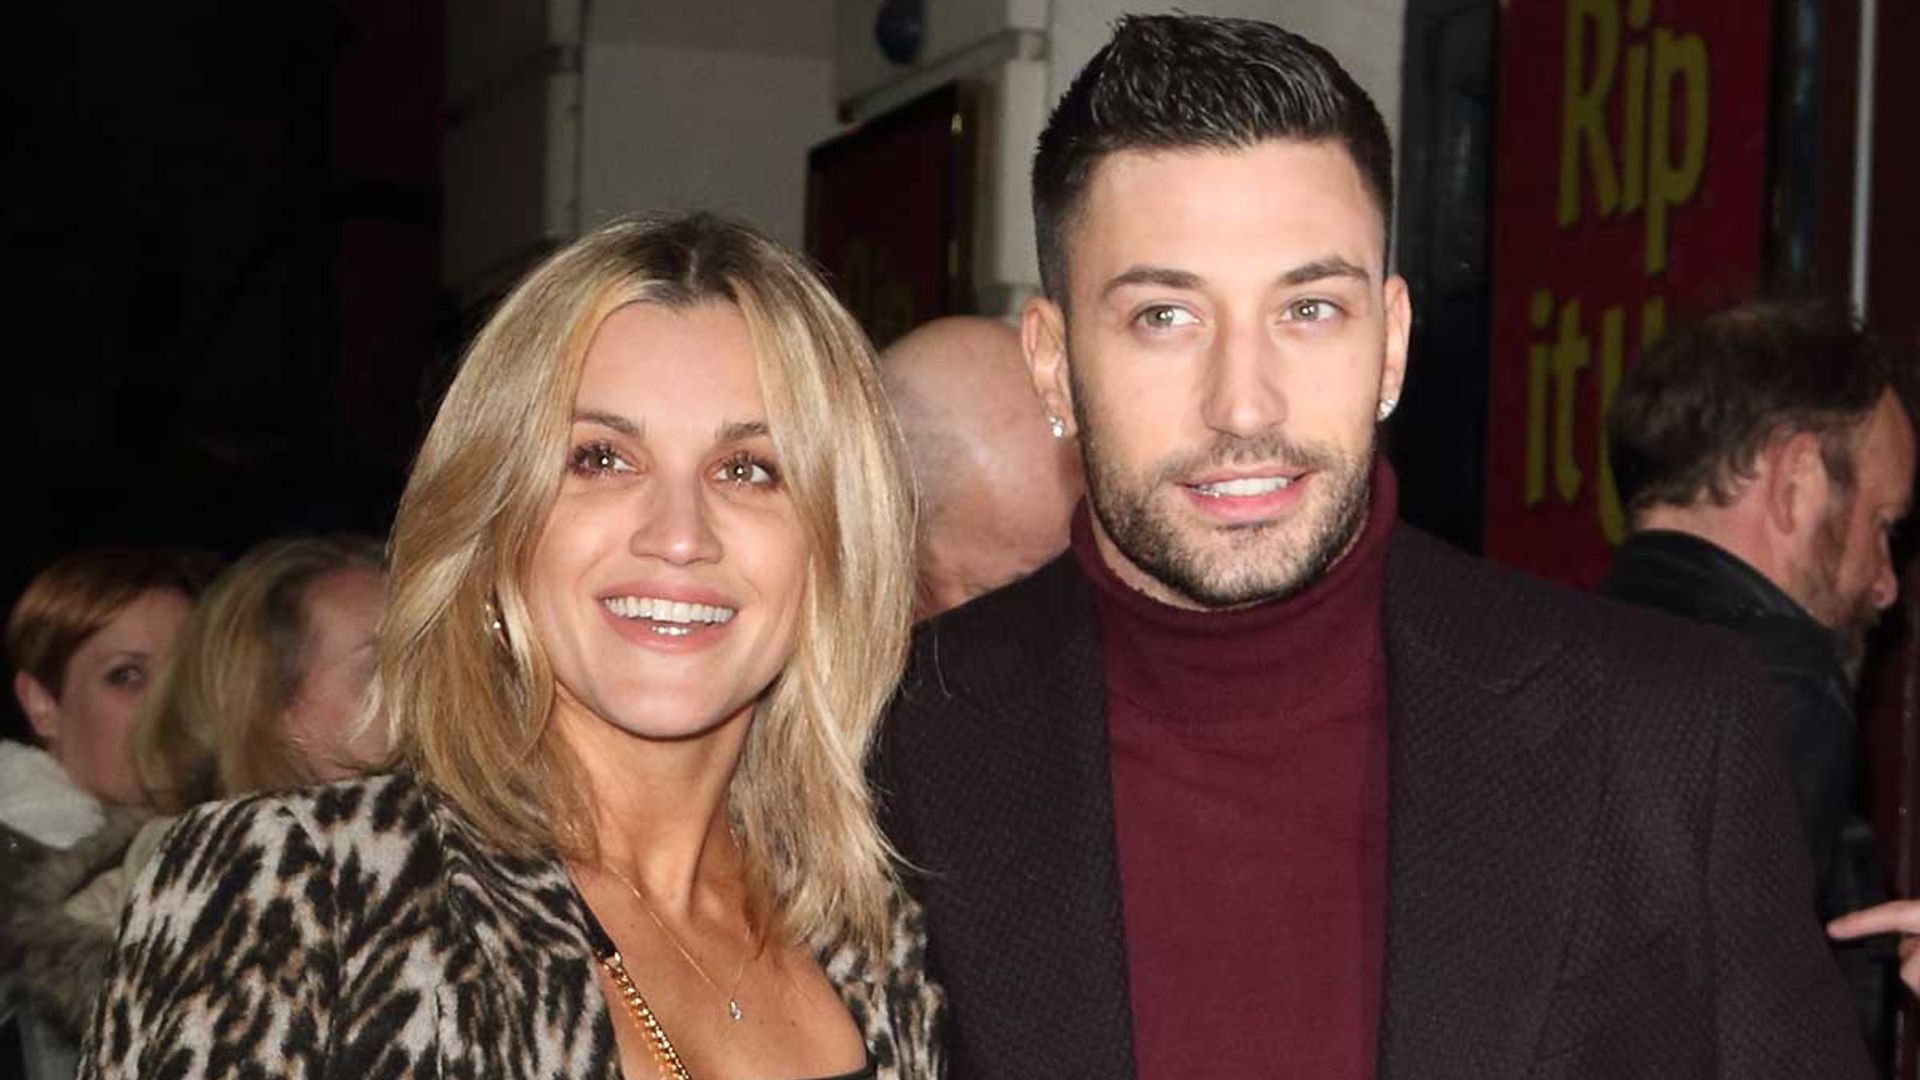 Ashley Roberts briefly reunited with Strictly's Giovanni Pernice - and she's never looked happier!